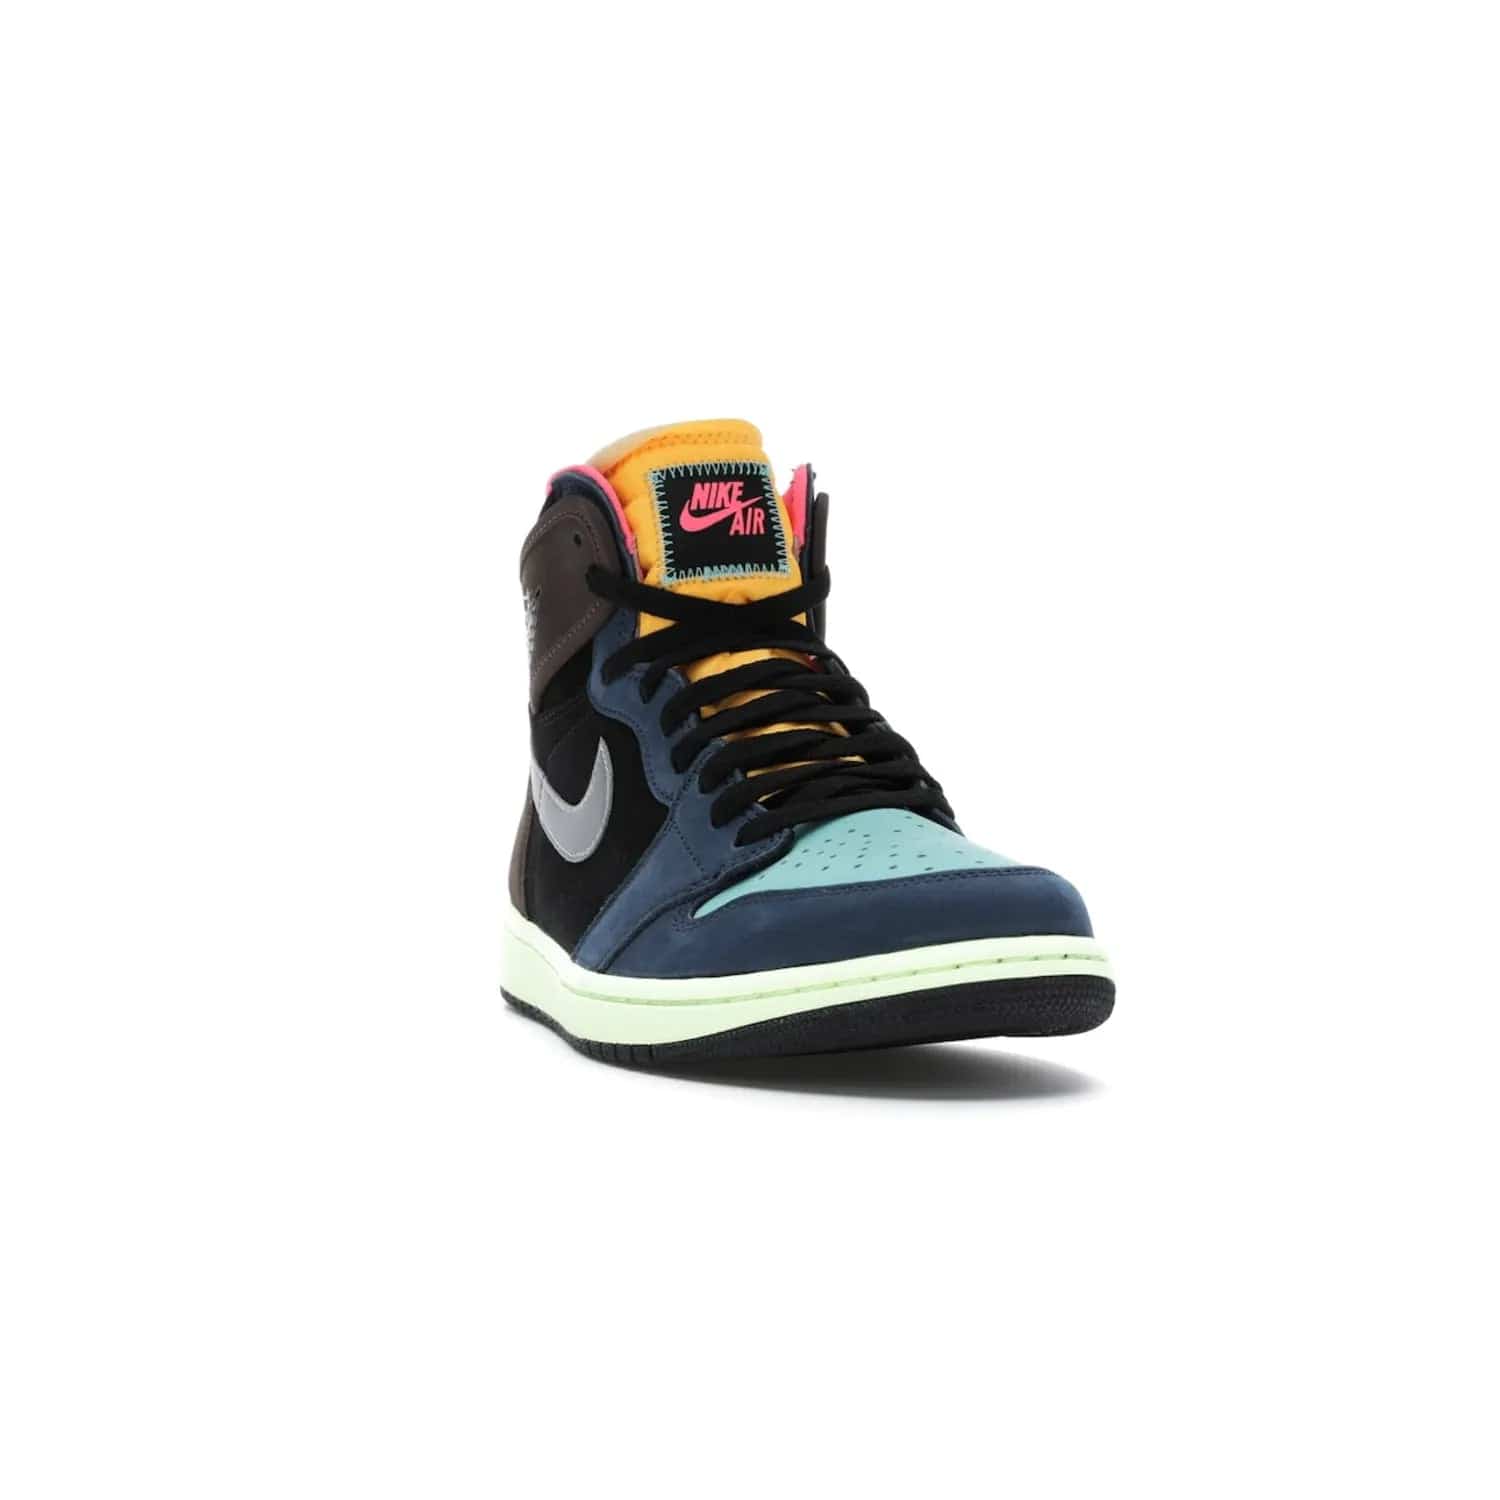 Jordan 1 Retro High Tokyo Bio Hack - Image 8 - Only at www.BallersClubKickz.com - Step up your sneaker game with the Air Jordan 1 Retro High Tokyo Bio Hack! Unique design featuring multiple materials and eye-catching colors. Metallic leather Swoosh and light green midsole for a stunning look. Available now for just $170.